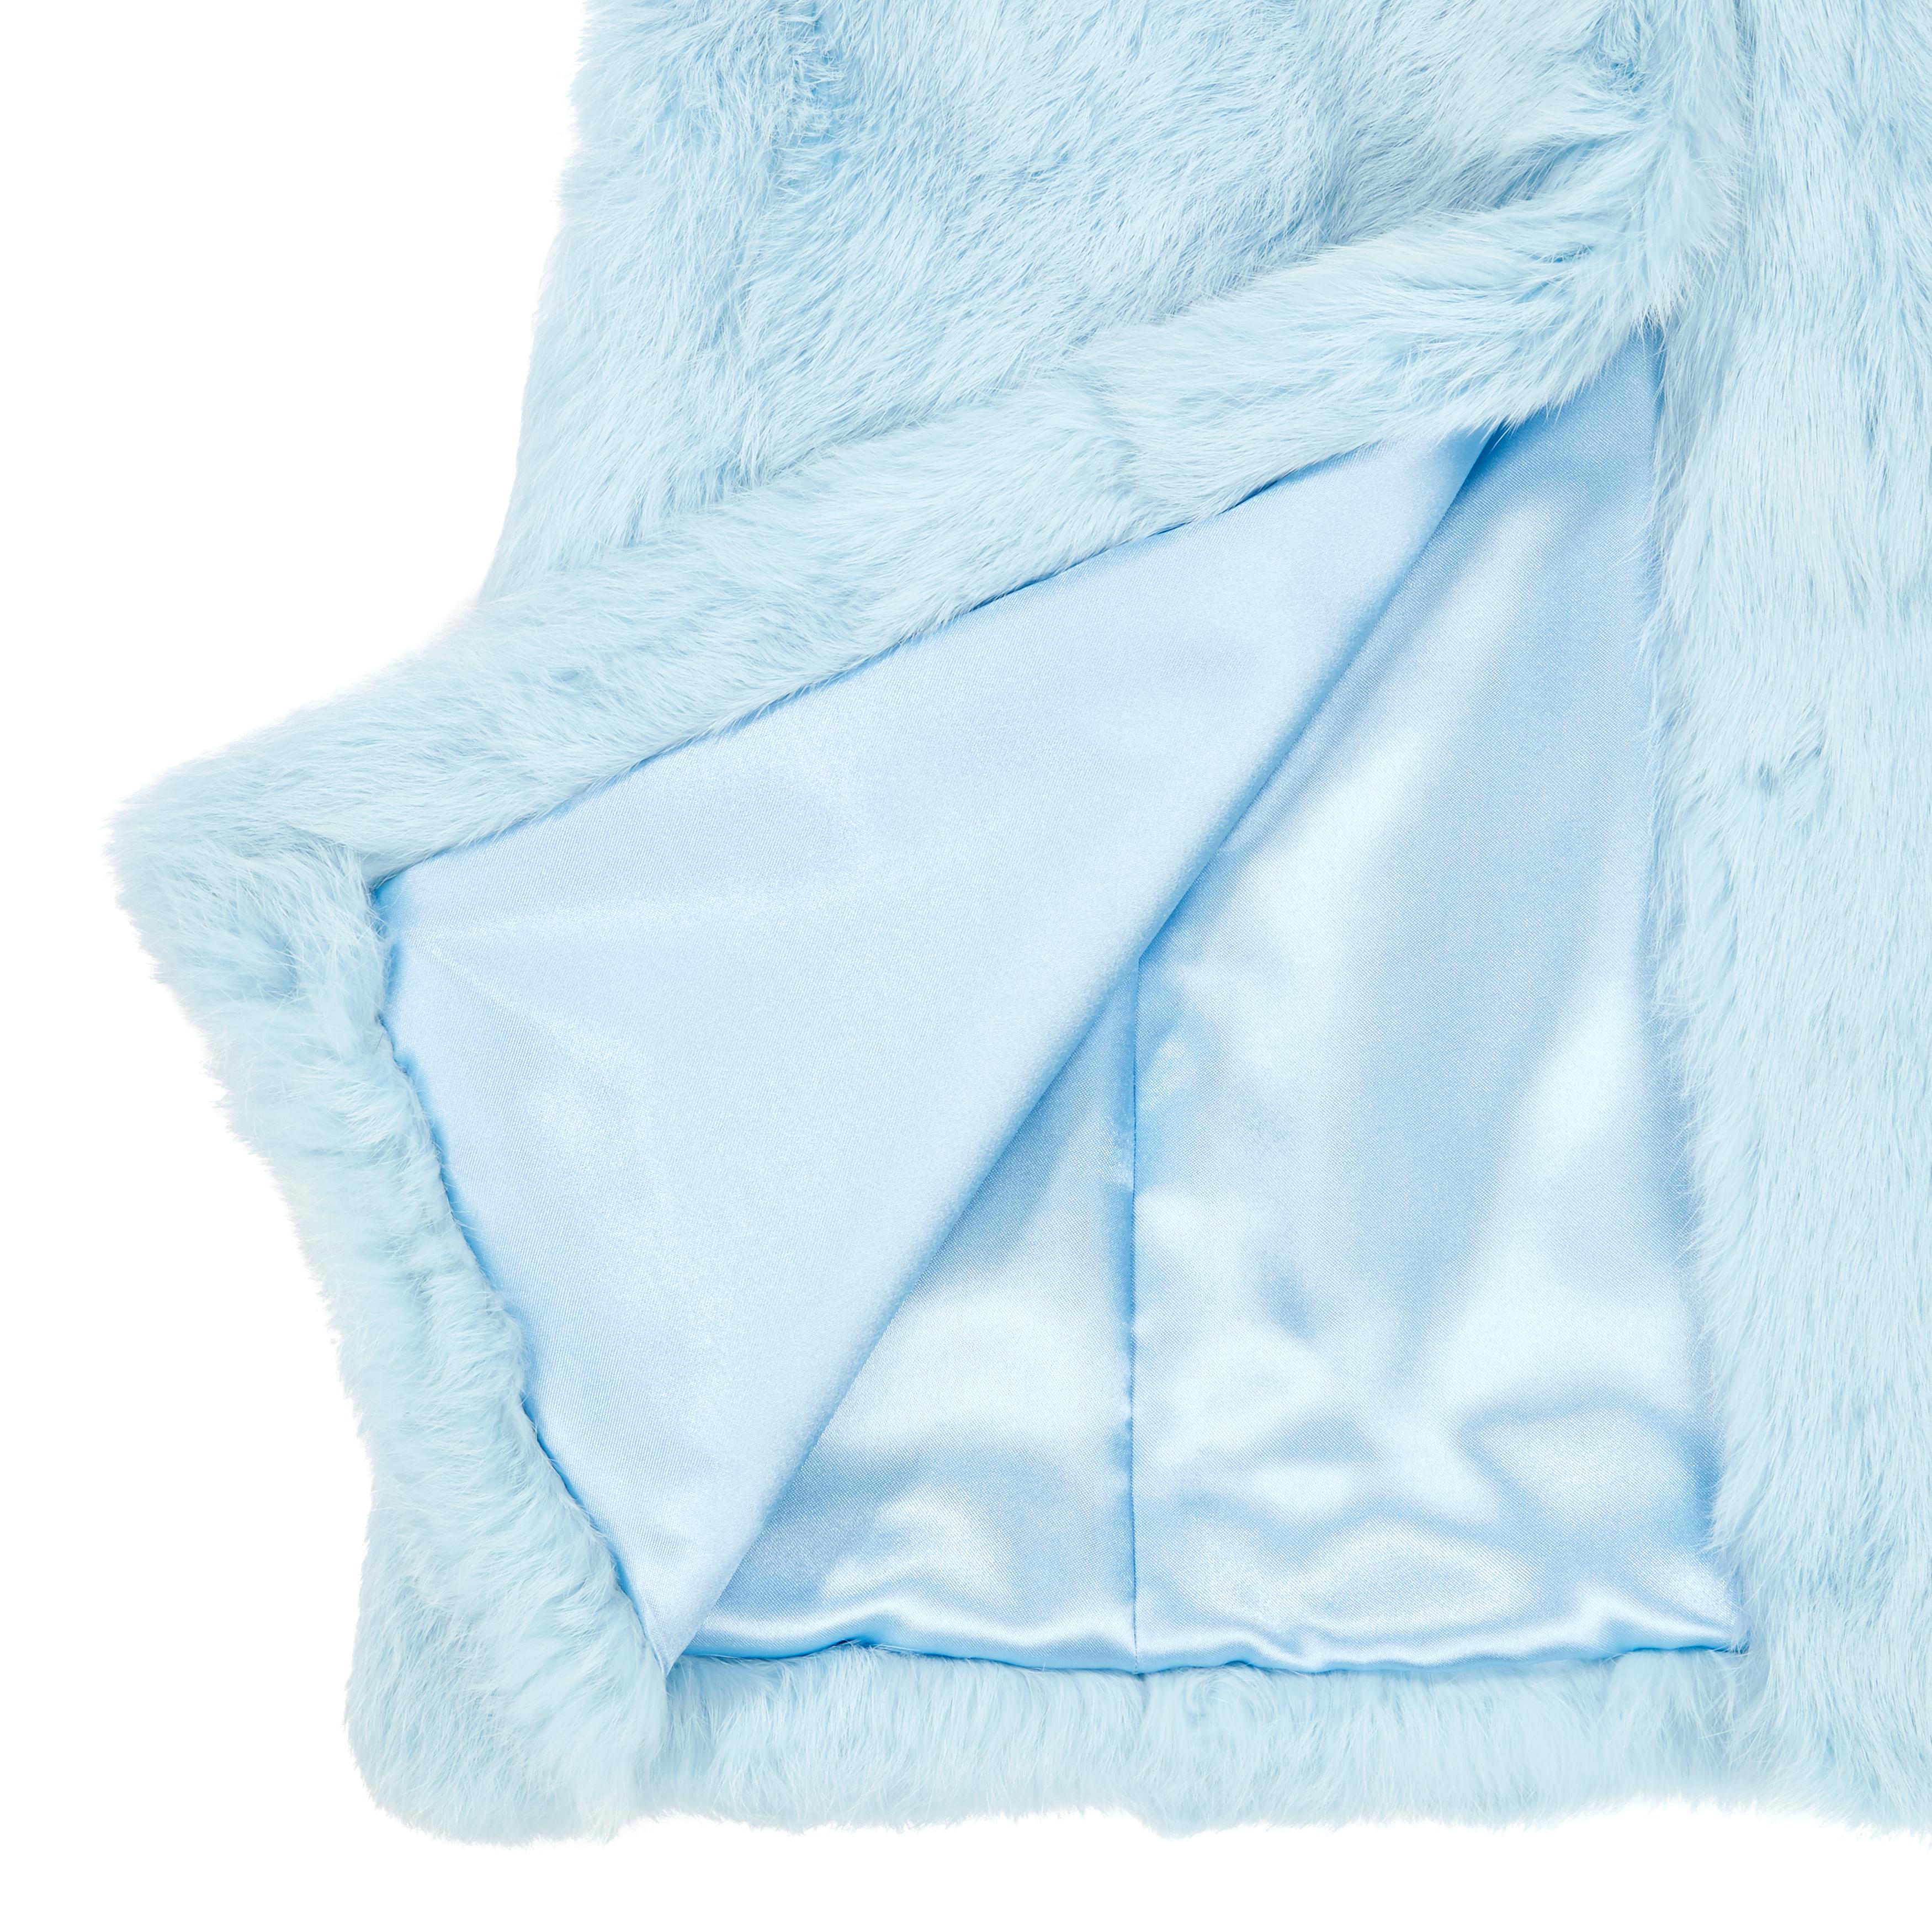 Verheyen London Nehru Gilet in Rabbit Fur in Iced Blue Topaz - Size Uk 8-10

PRODUCT DETAILS - Brand New 
The Nehru gilet is Verheyen London’s casual design. The tailored statement gilet is perfect with a pair or jeans, and or over a jumper in the